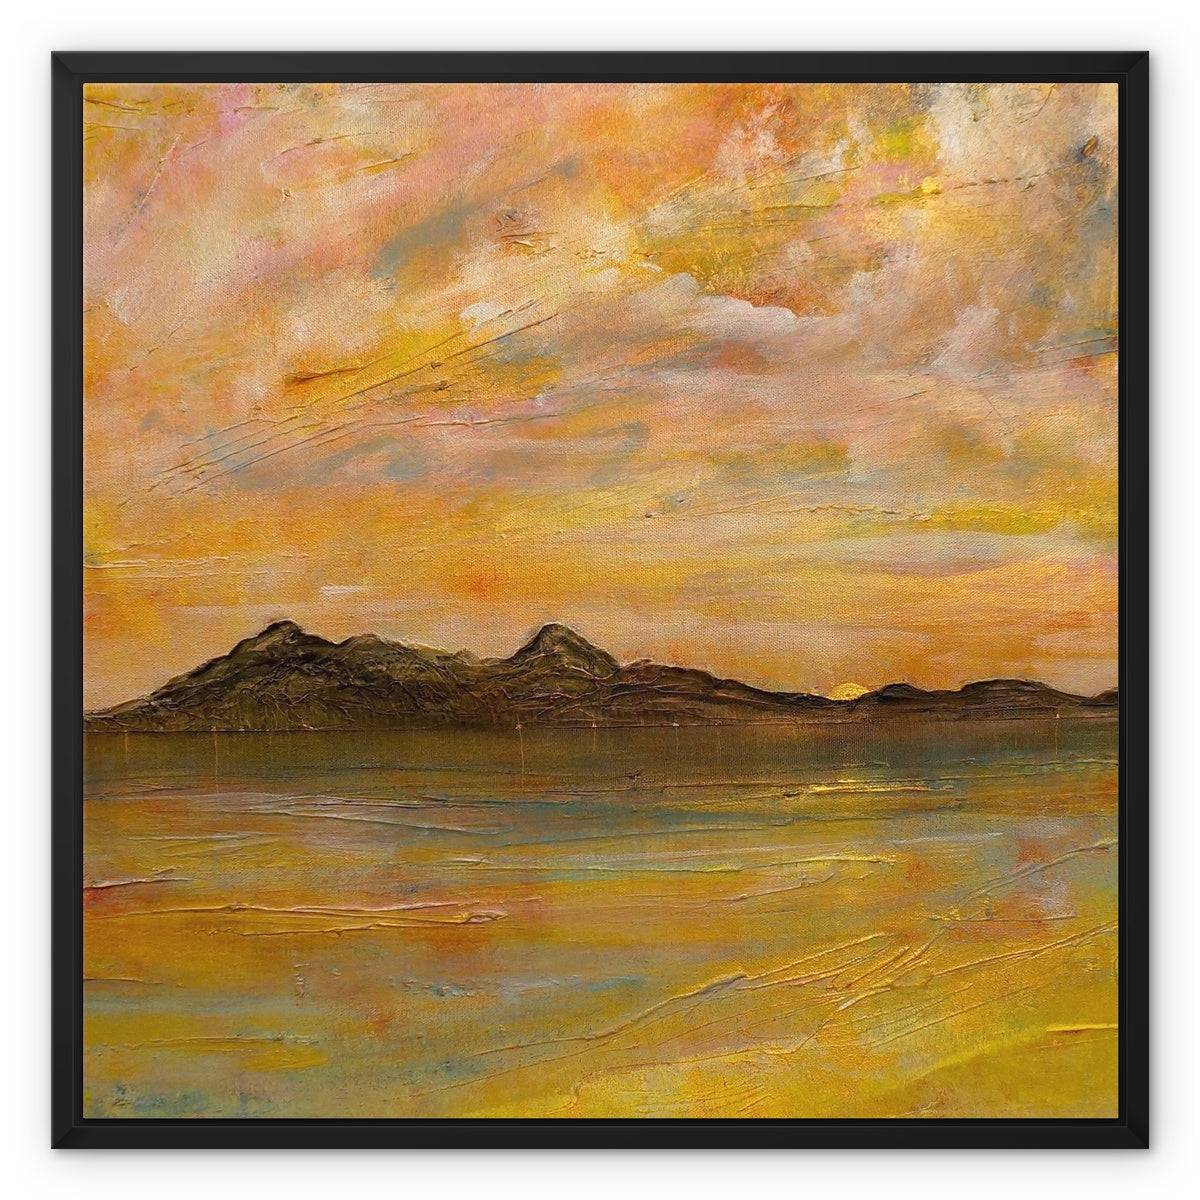 Arran Dusk Painting | Framed Canvas From Scotland-Floating Framed Canvas Prints-Arran Art Gallery-24"x24"-Black Frame-Paintings, Prints, Homeware, Art Gifts From Scotland By Scottish Artist Kevin Hunter